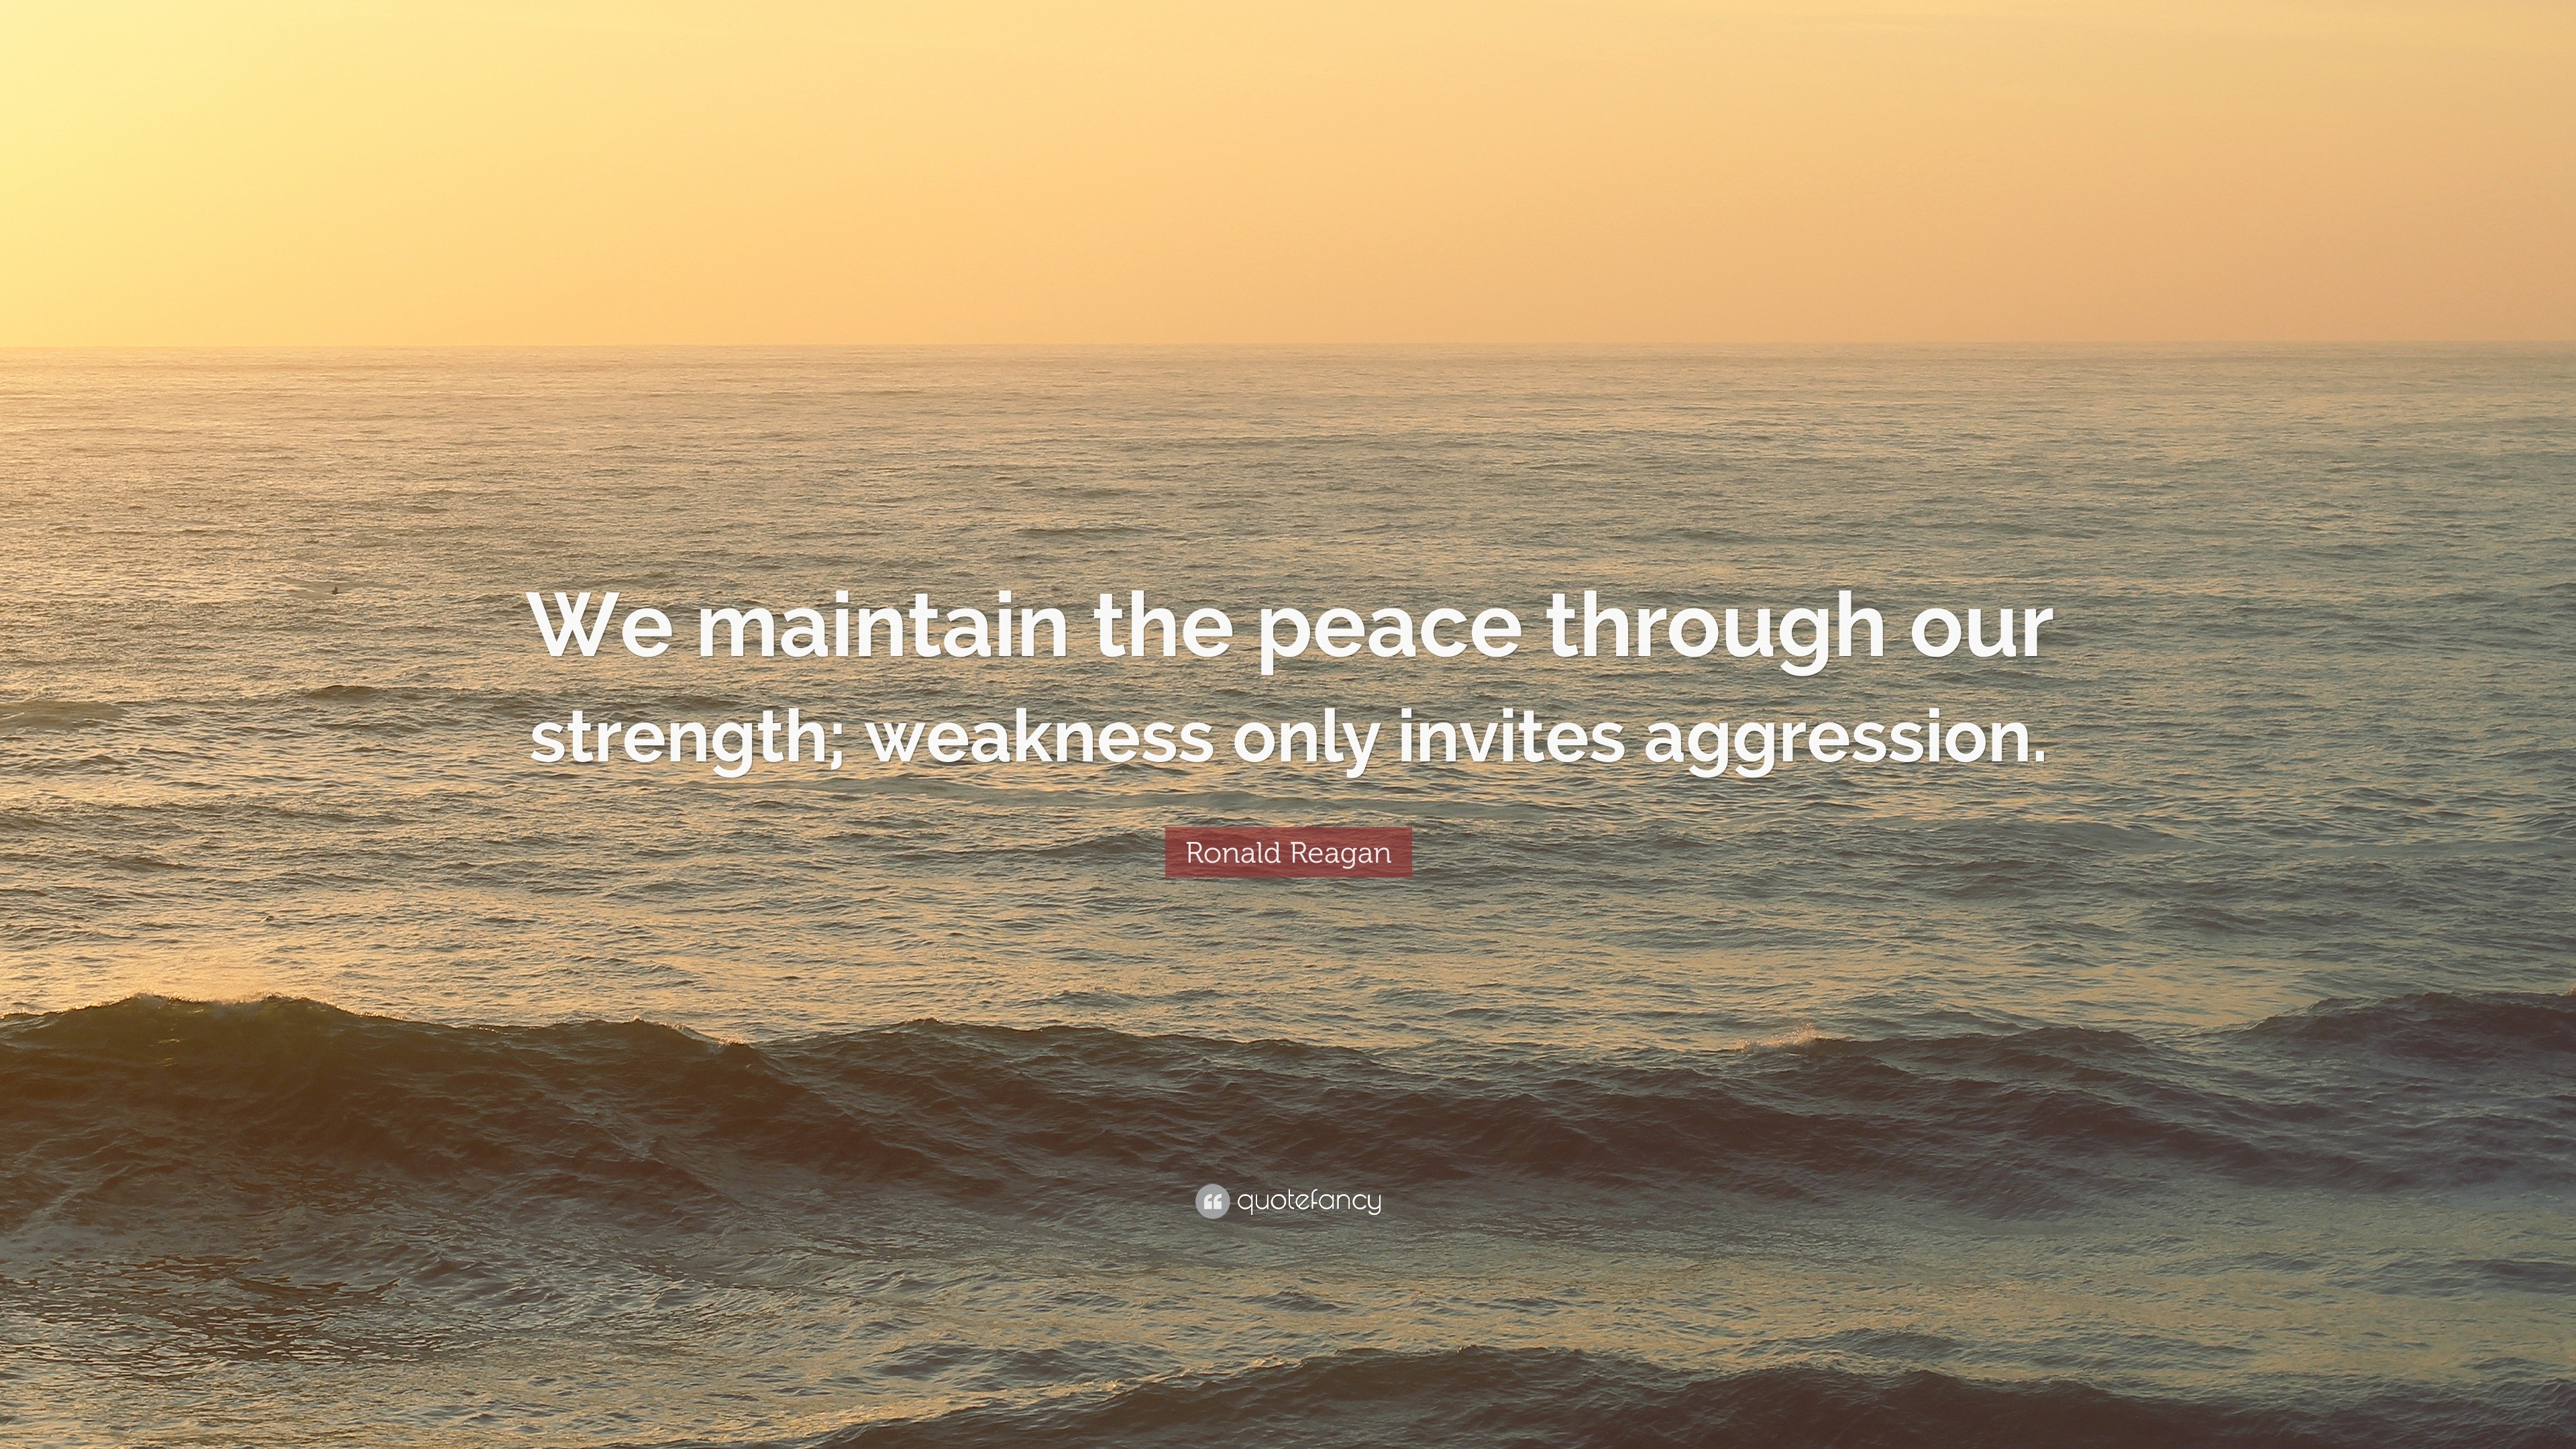 Ronald Reagan Quote: “We maintain the peace through our strength